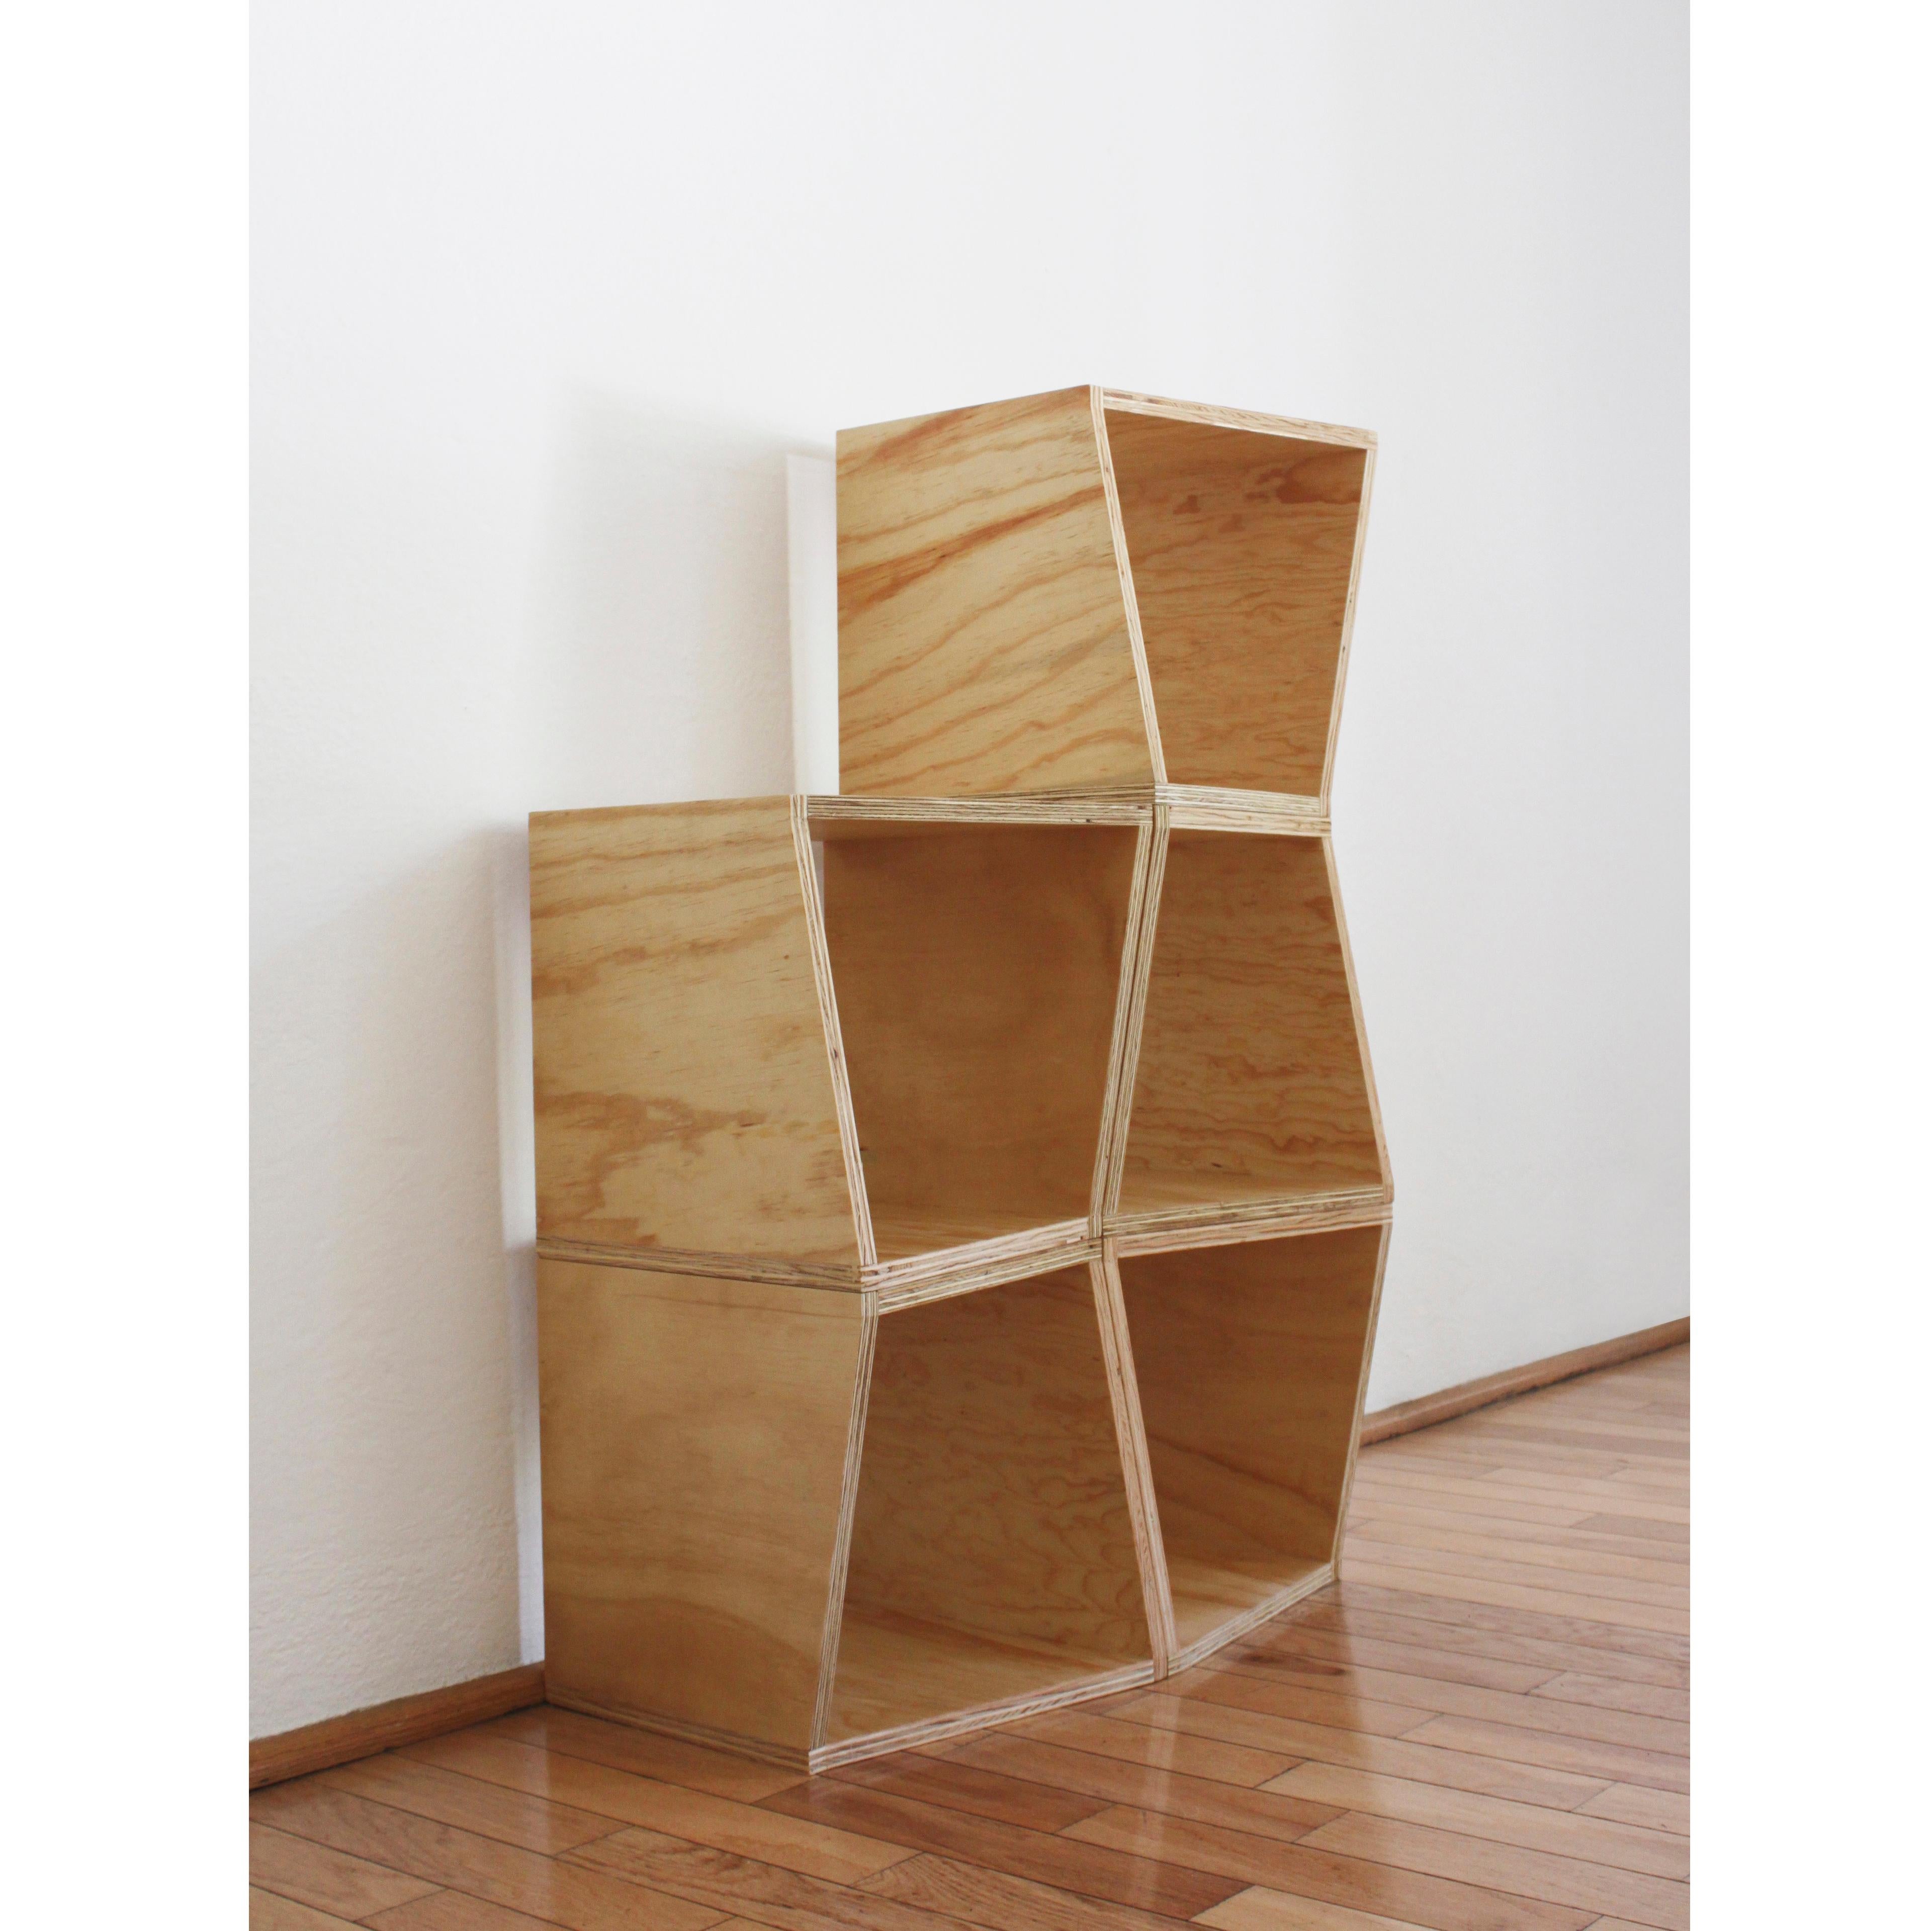 Cubos Union by Maria Beckmann

Stacking Cubes
2013
W 14.2